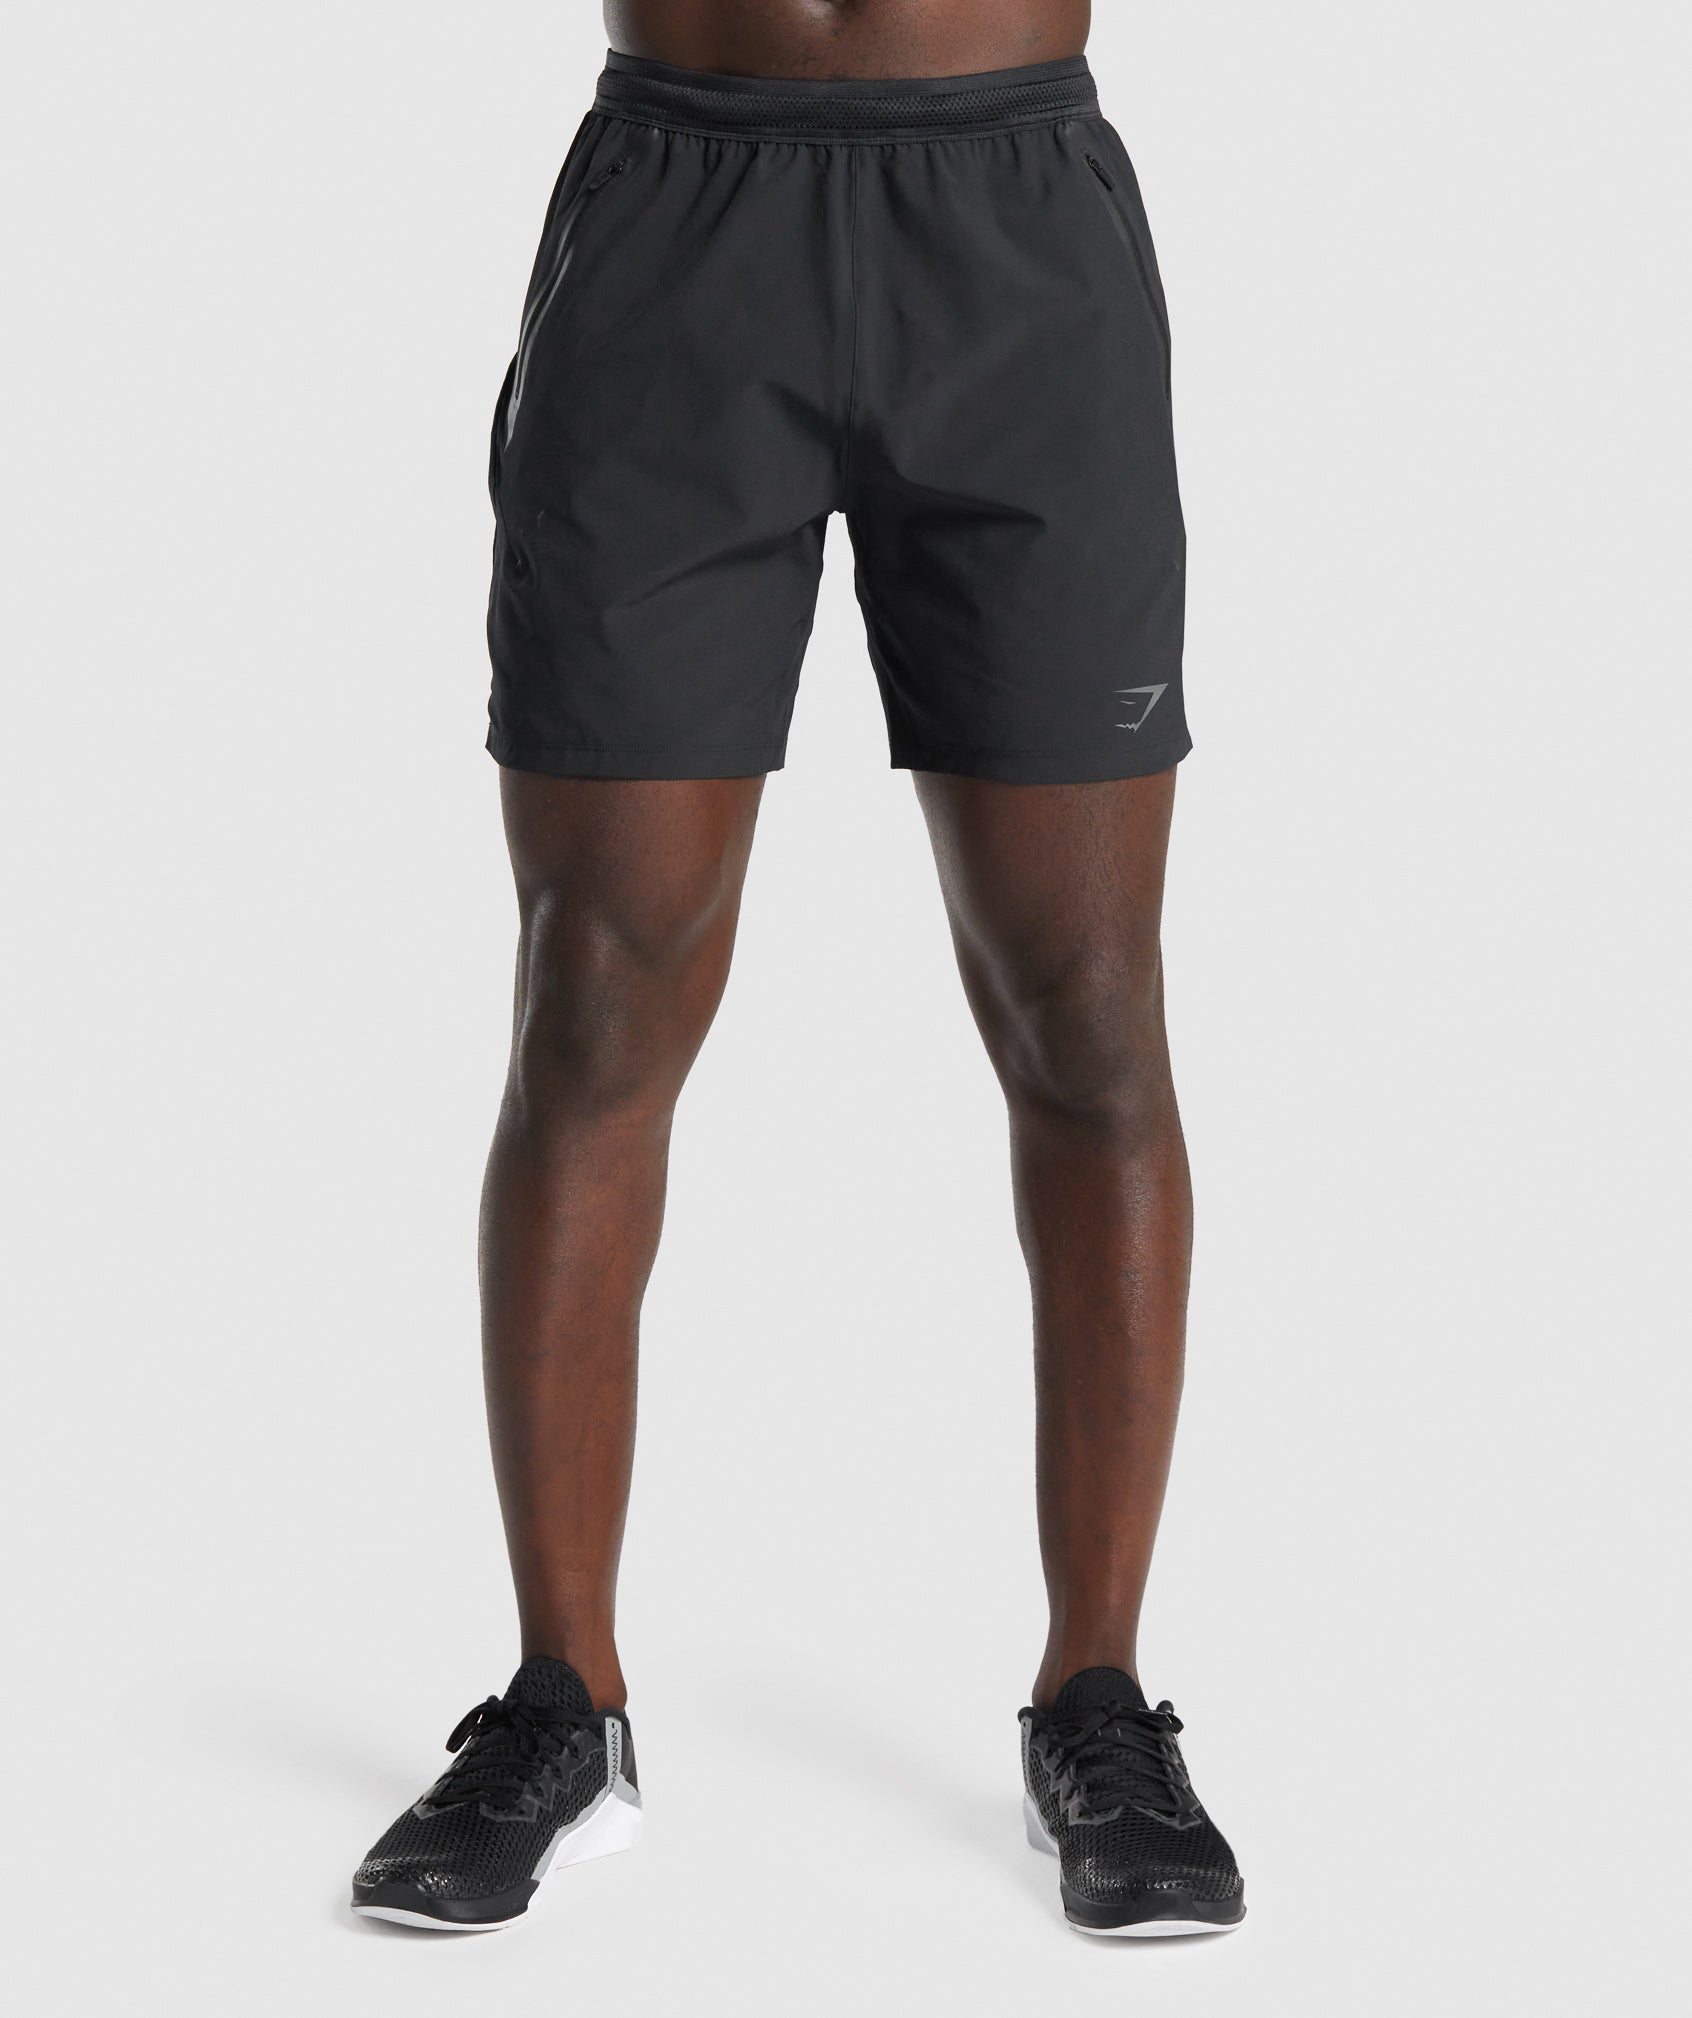 Apex 7" Perform Shorts in Black - view 1